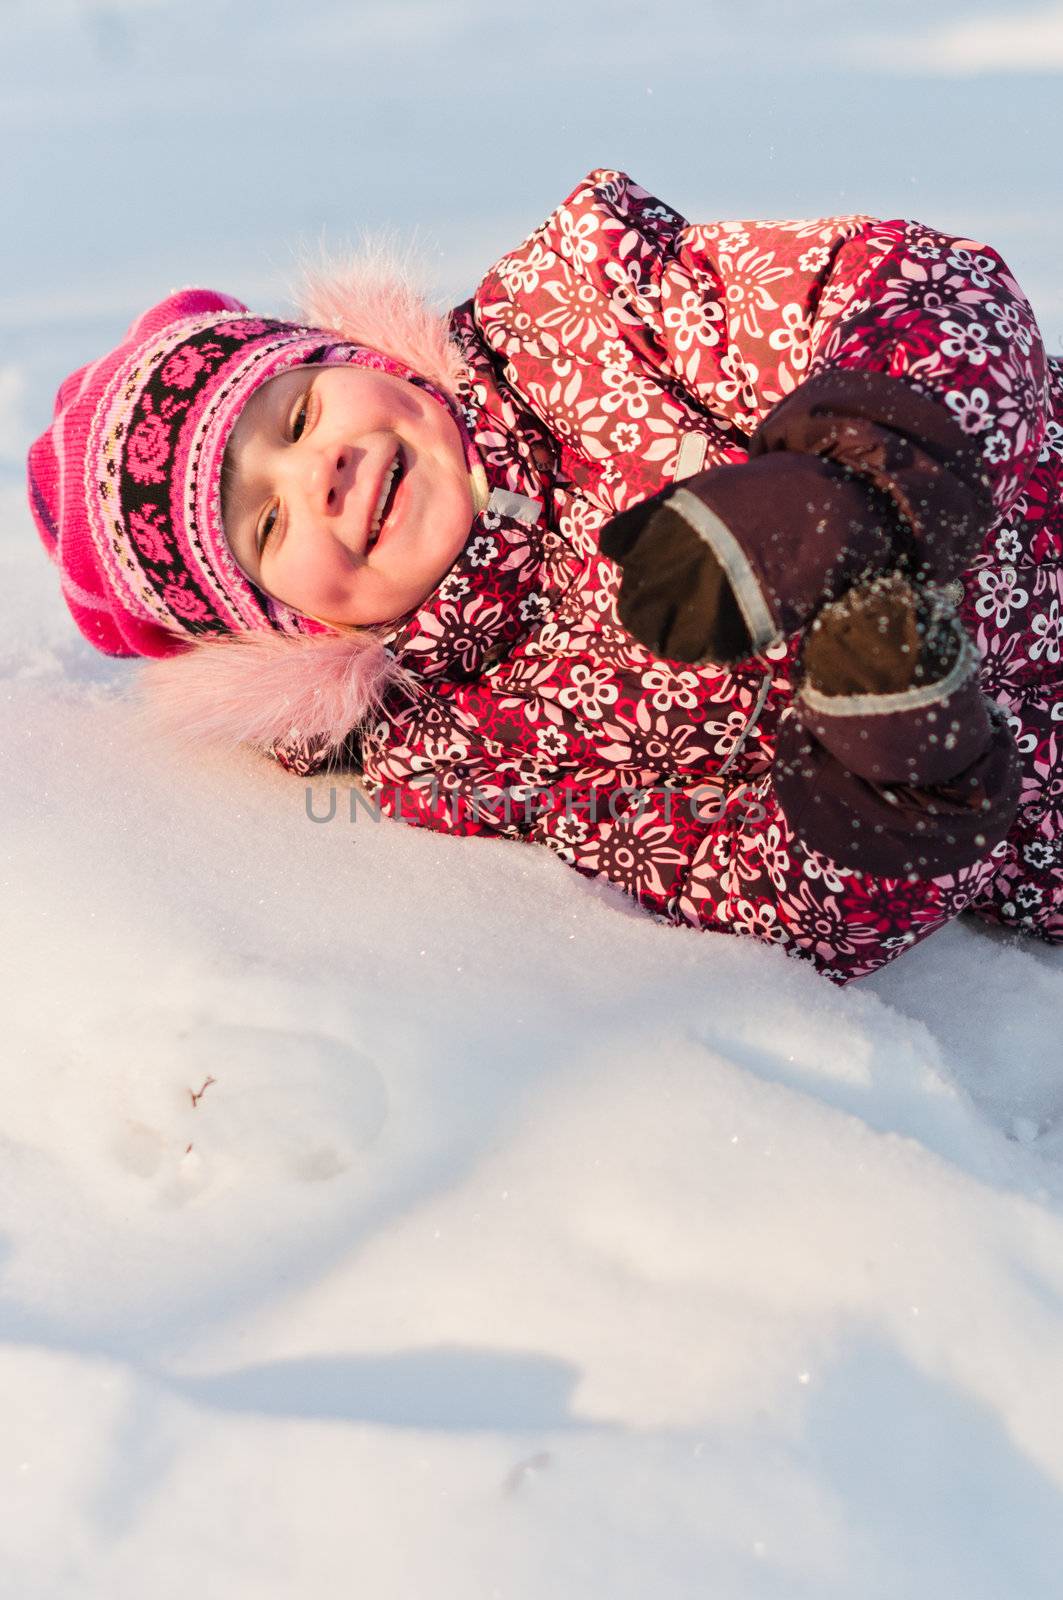 Baby lays on snow and laugh by dmitryelagin